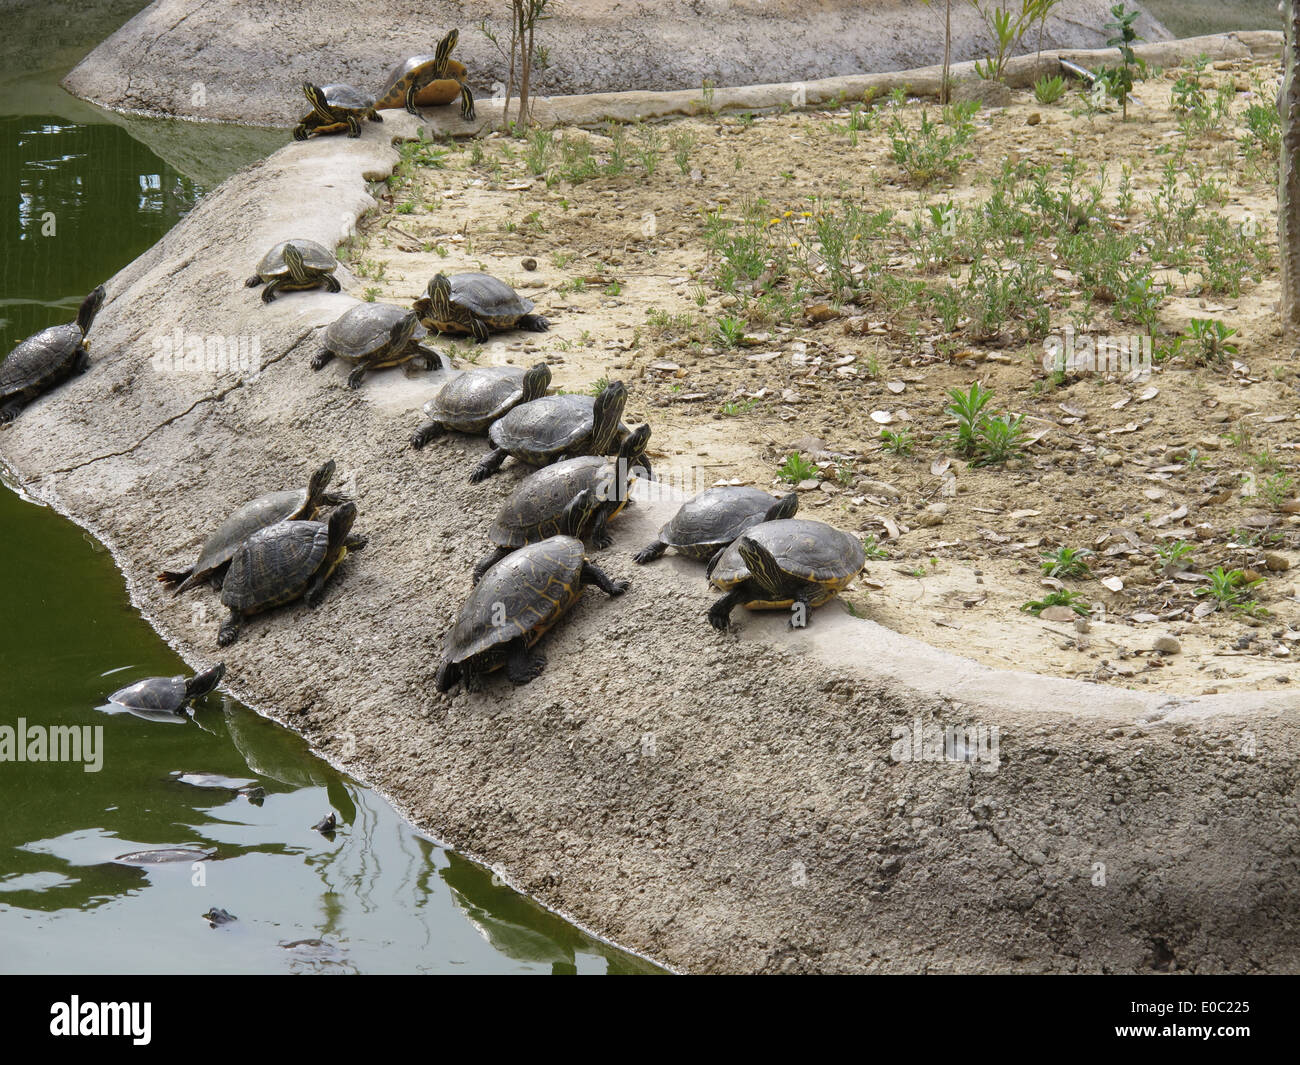 A group of turtles climbing up the side of a pond Stock Photo